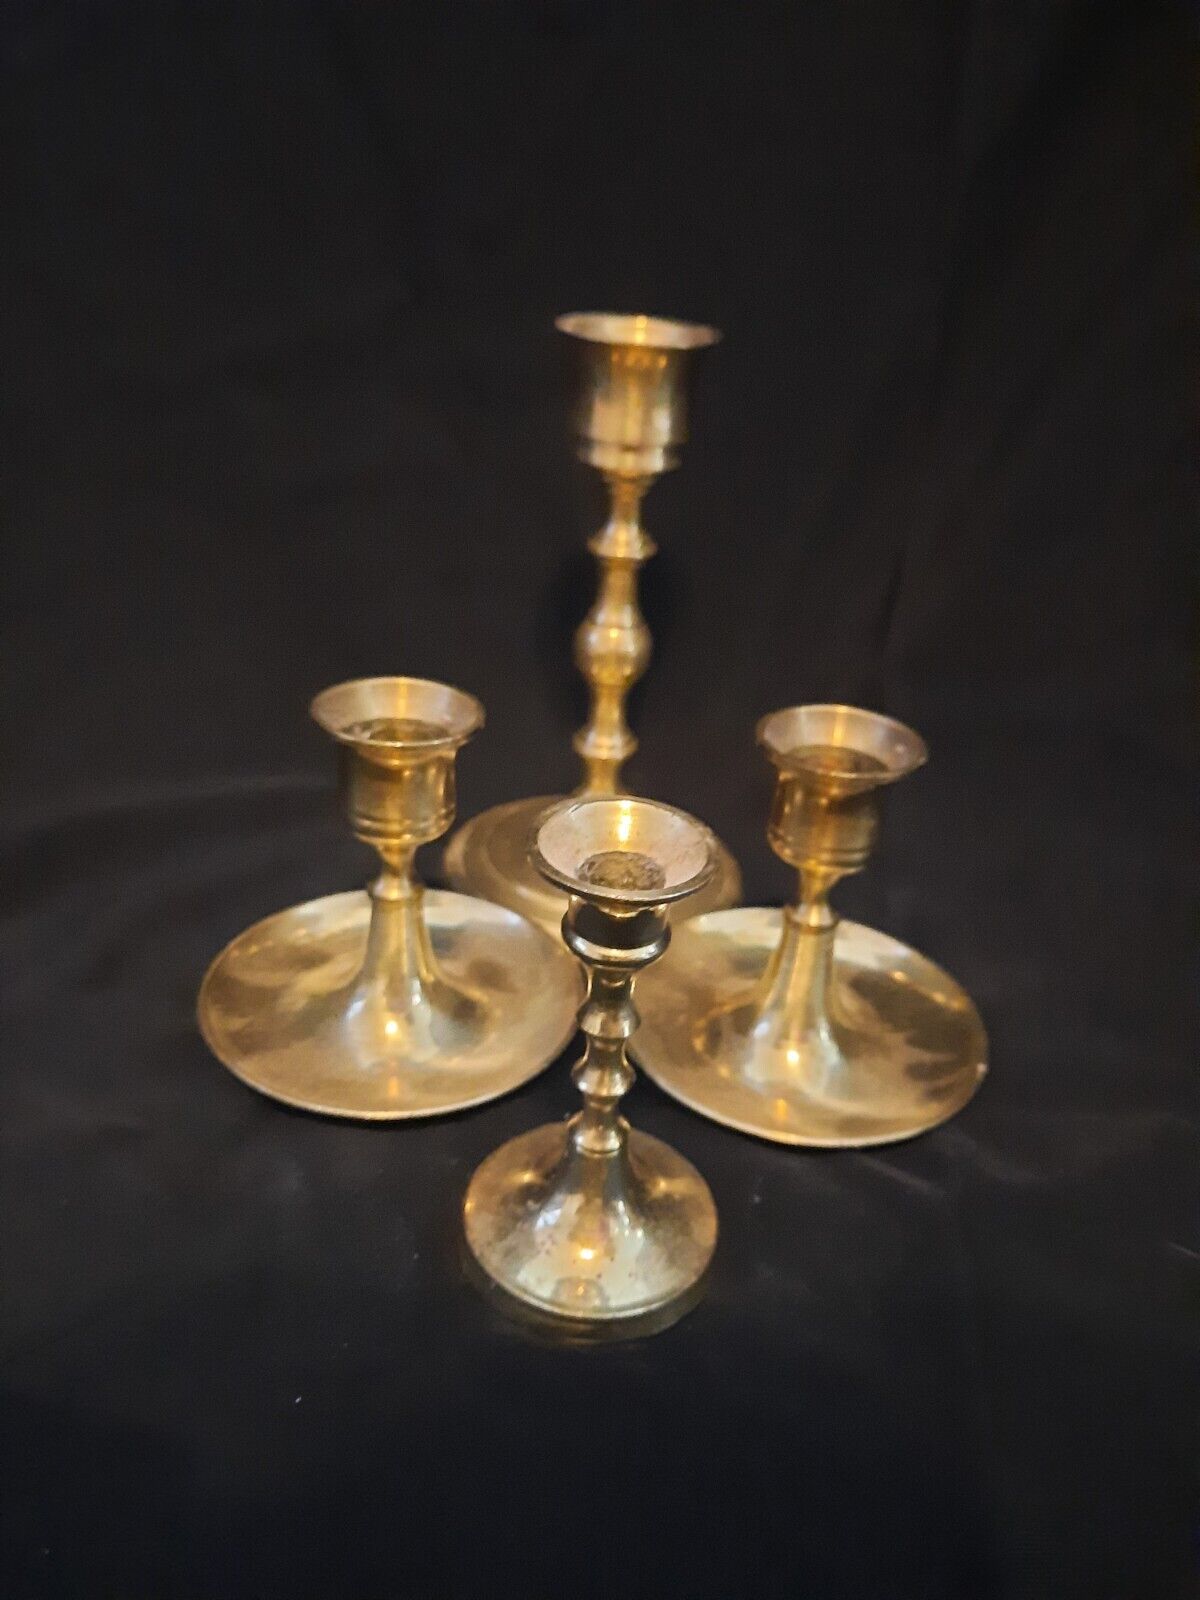 Mixed Lot of 4 Vintage Brass Candlesticks Holders Weddings Events Cottagecore